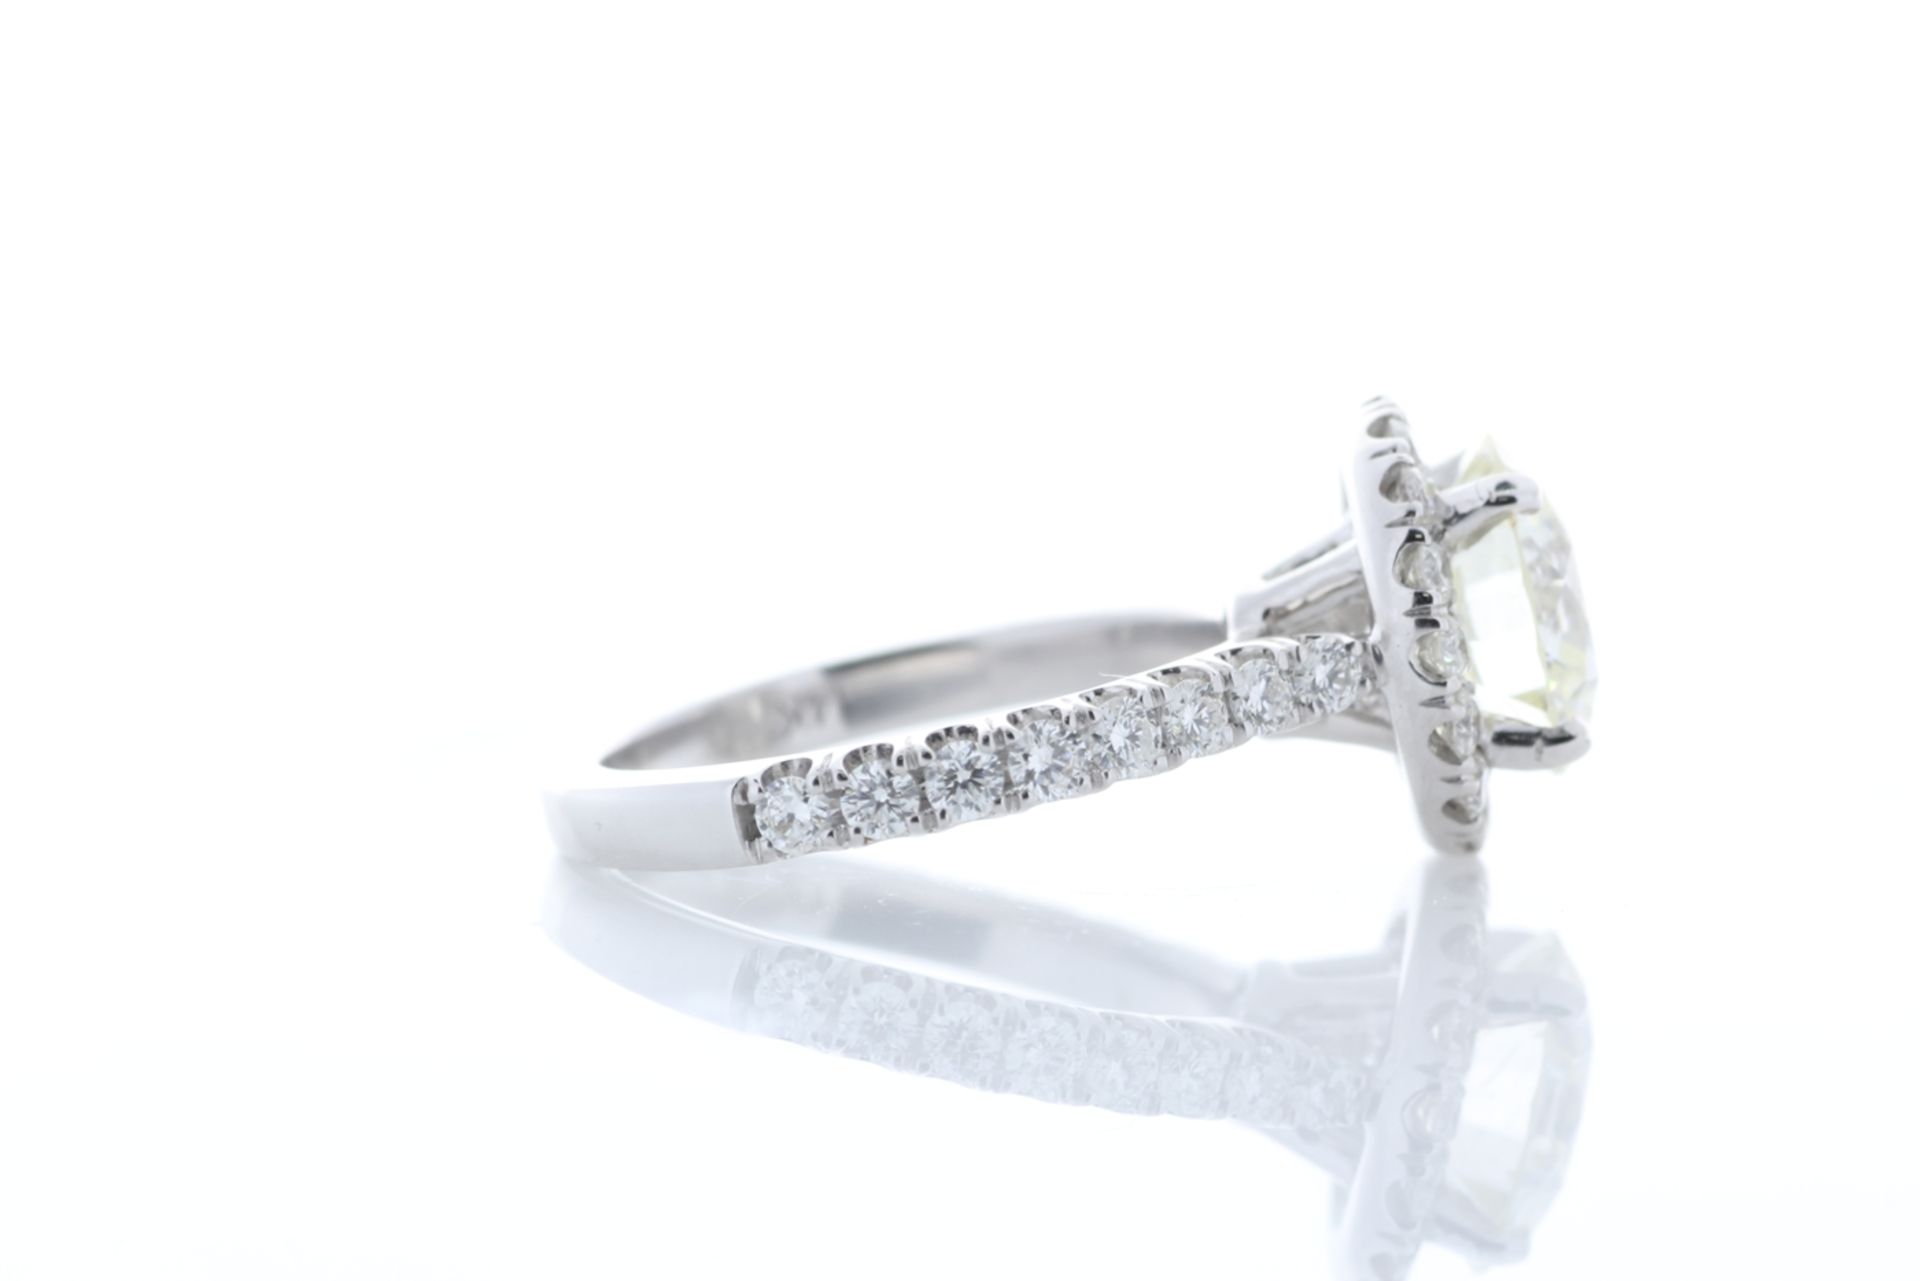 18ct White Gold Single Stone With Halo Setting Ring 2.85 Centre Stone - Image 6 of 9